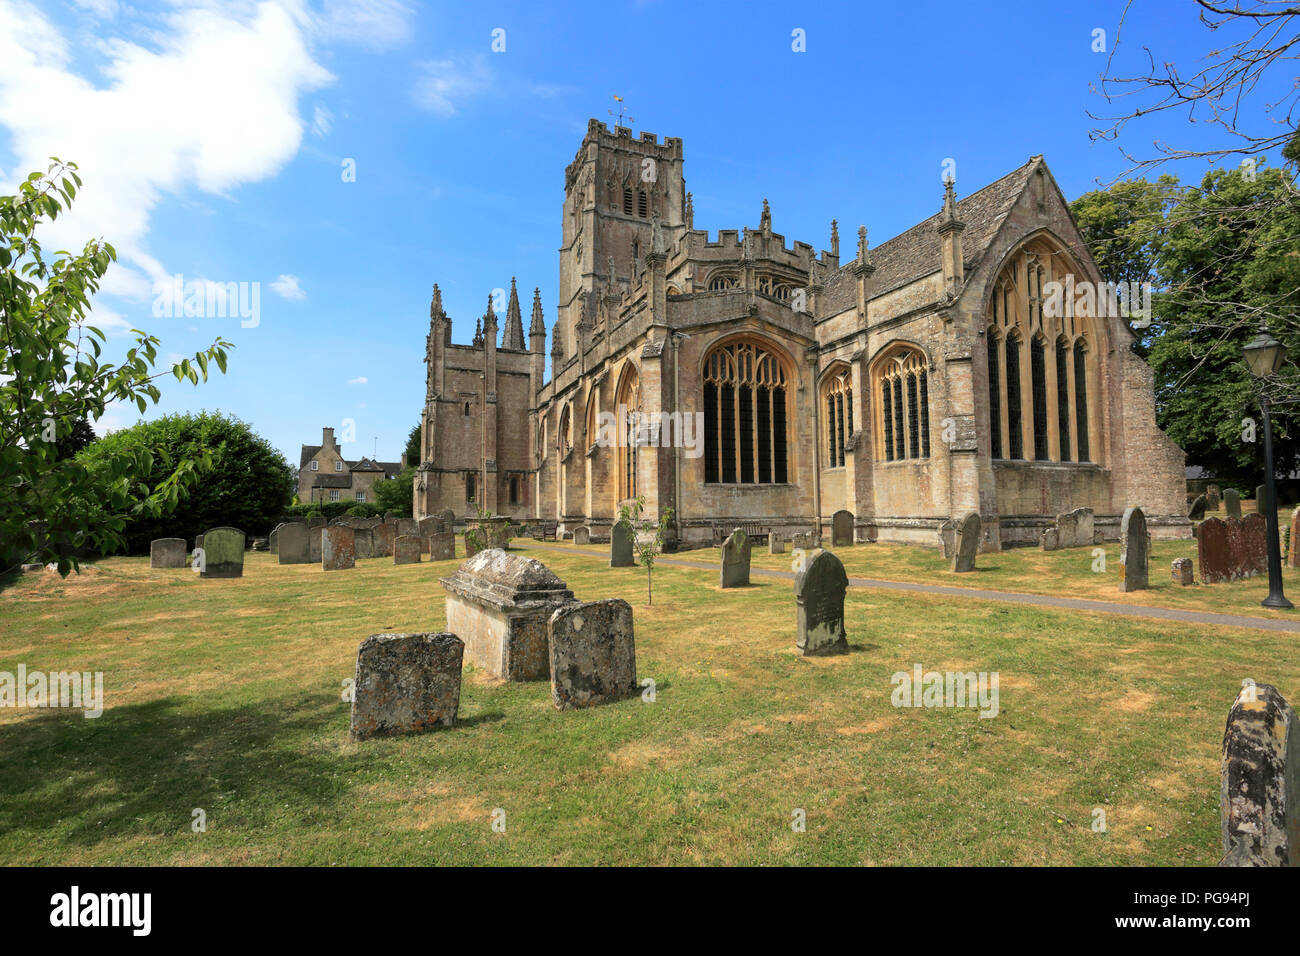 St Peter St Pauls chiesa, Northleach town, Gloucestershire, Cotswolds, Inghilterra Foto Stock